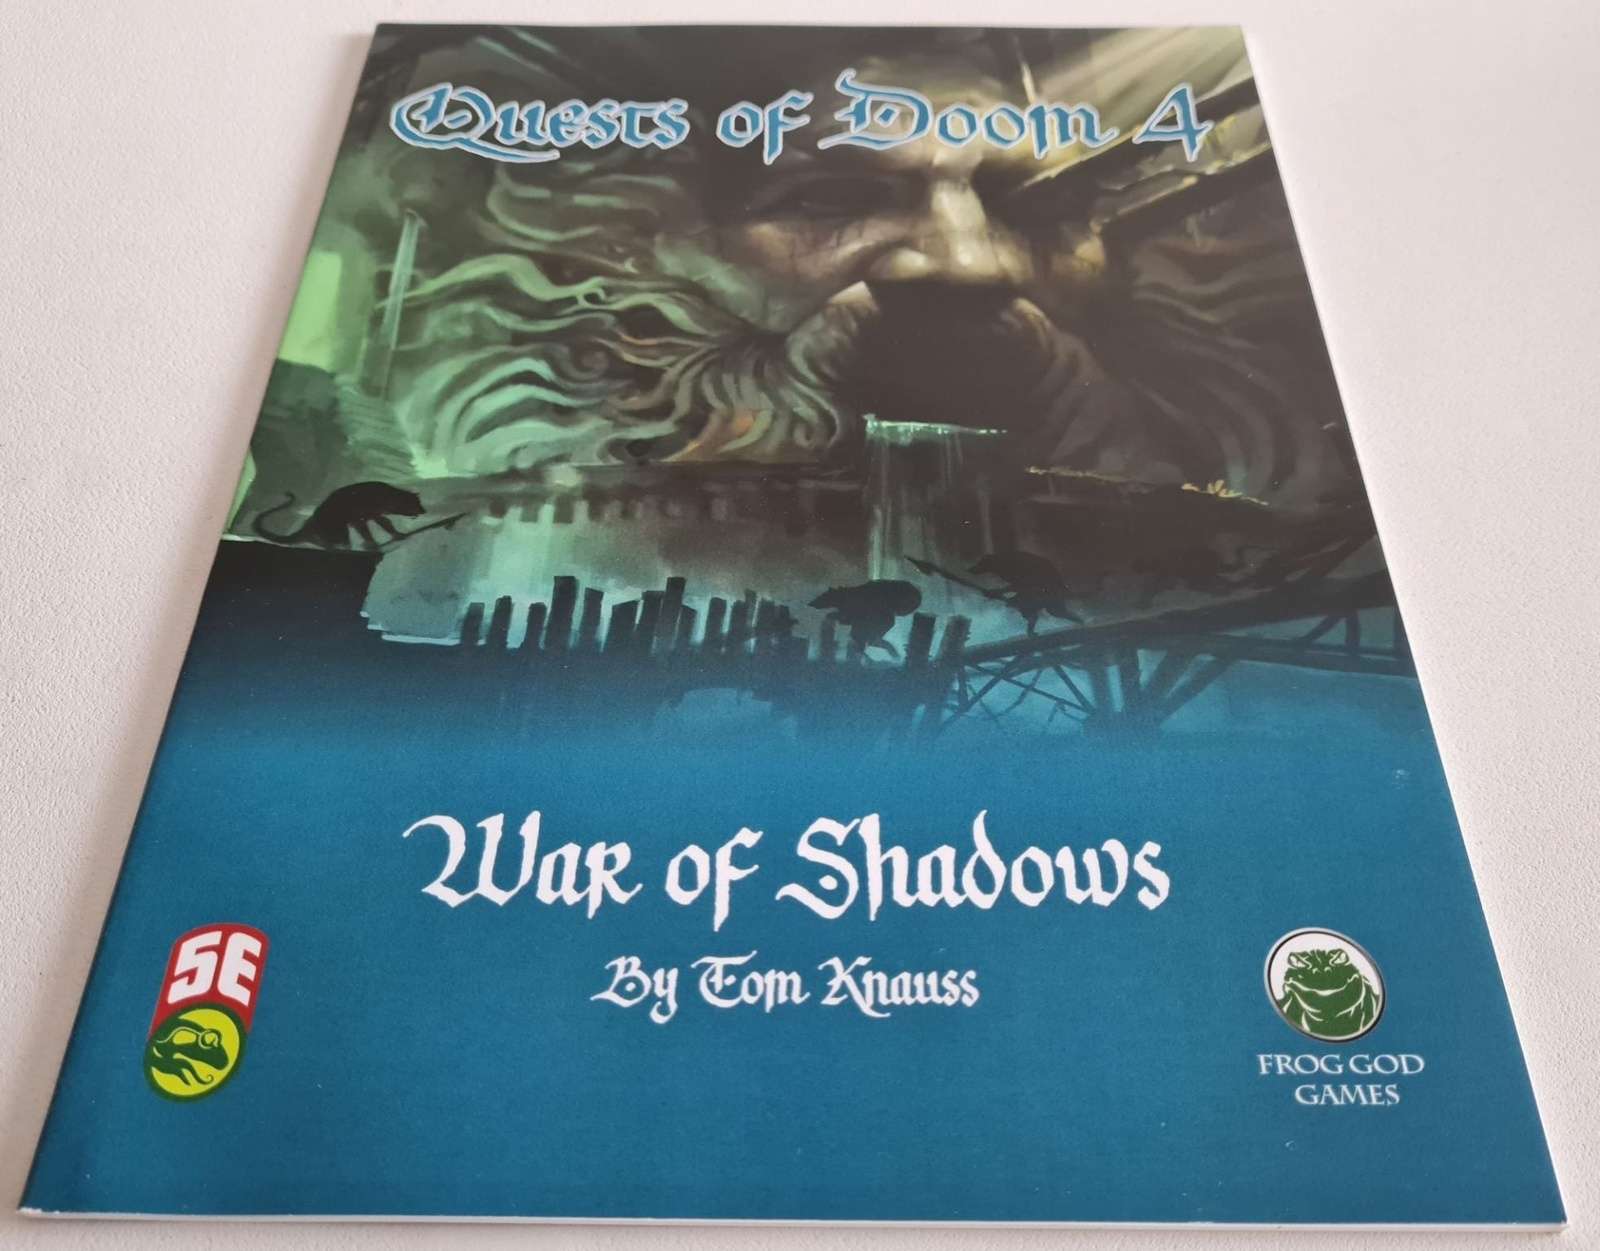 Quests of Doom 4: War of Shadows - Dungeons and Dragons 5th Edition (5e) Default Title